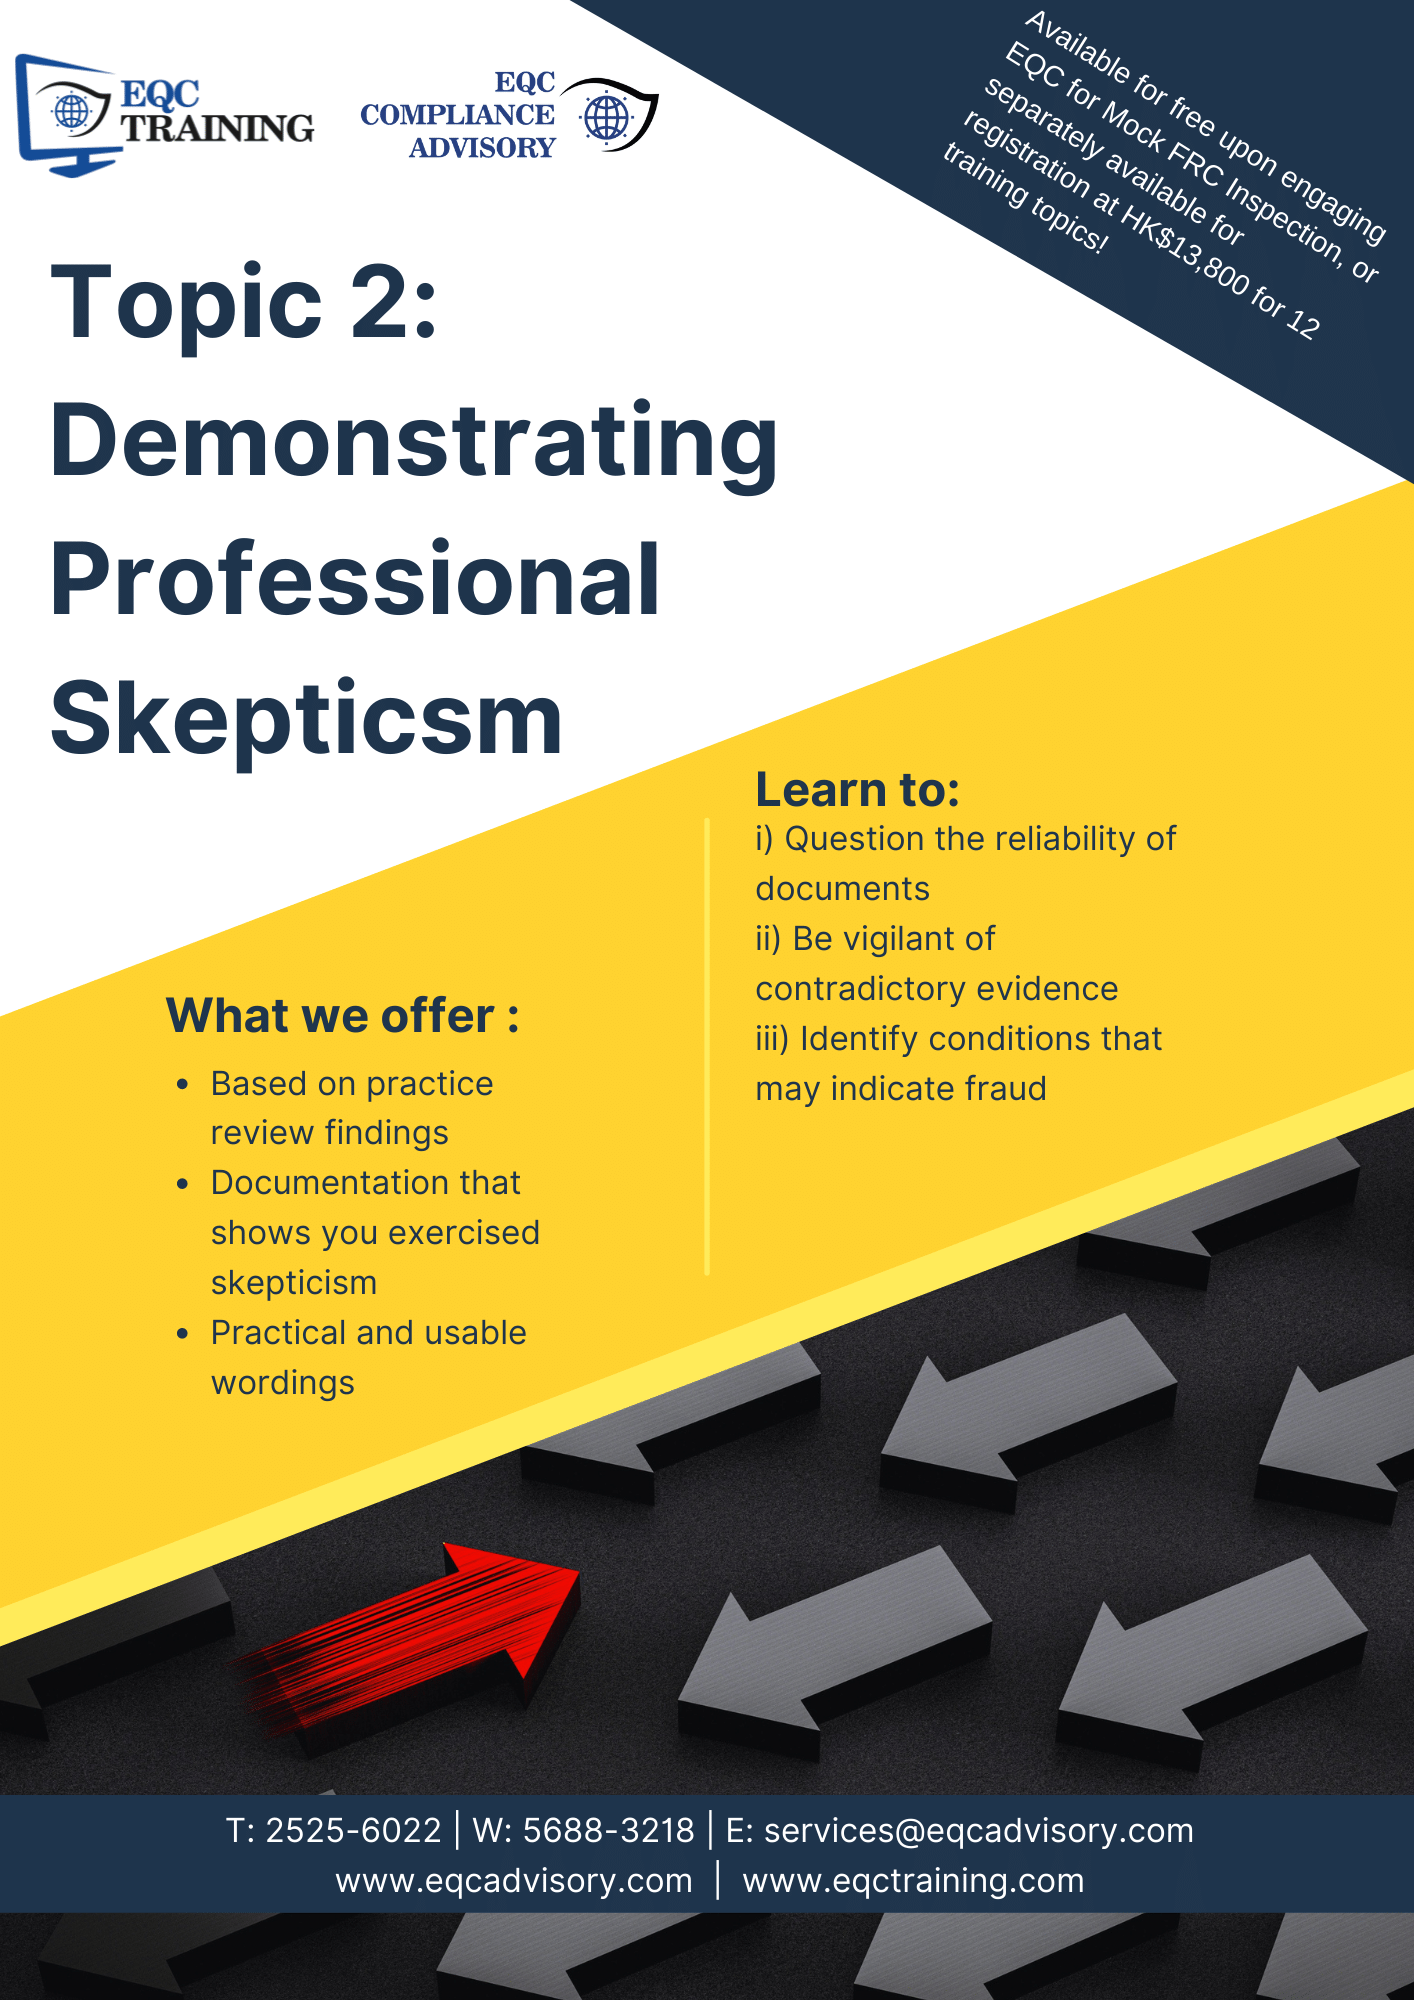 Topic 02 - Demonstrating Professional Skepticism